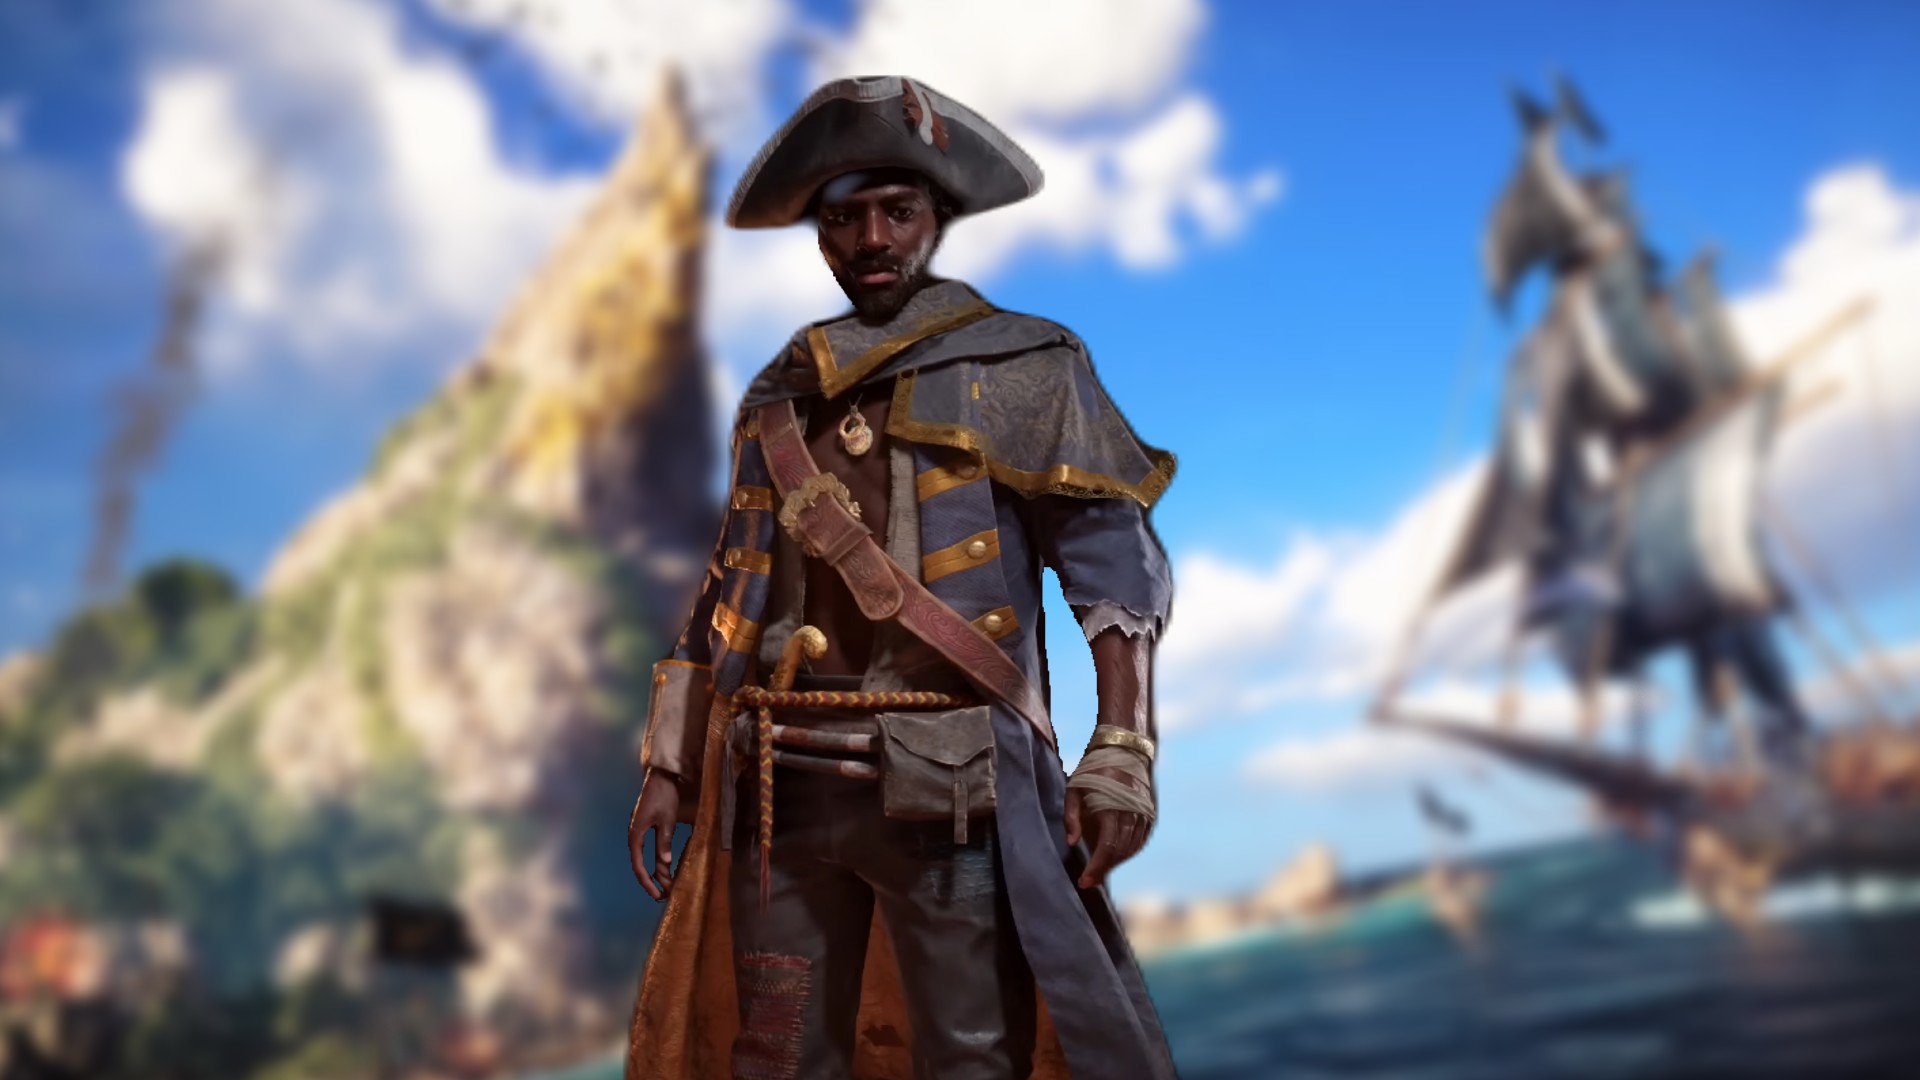 Skull & Bones' 2019 release date is the best thing to happen to it - Polygon